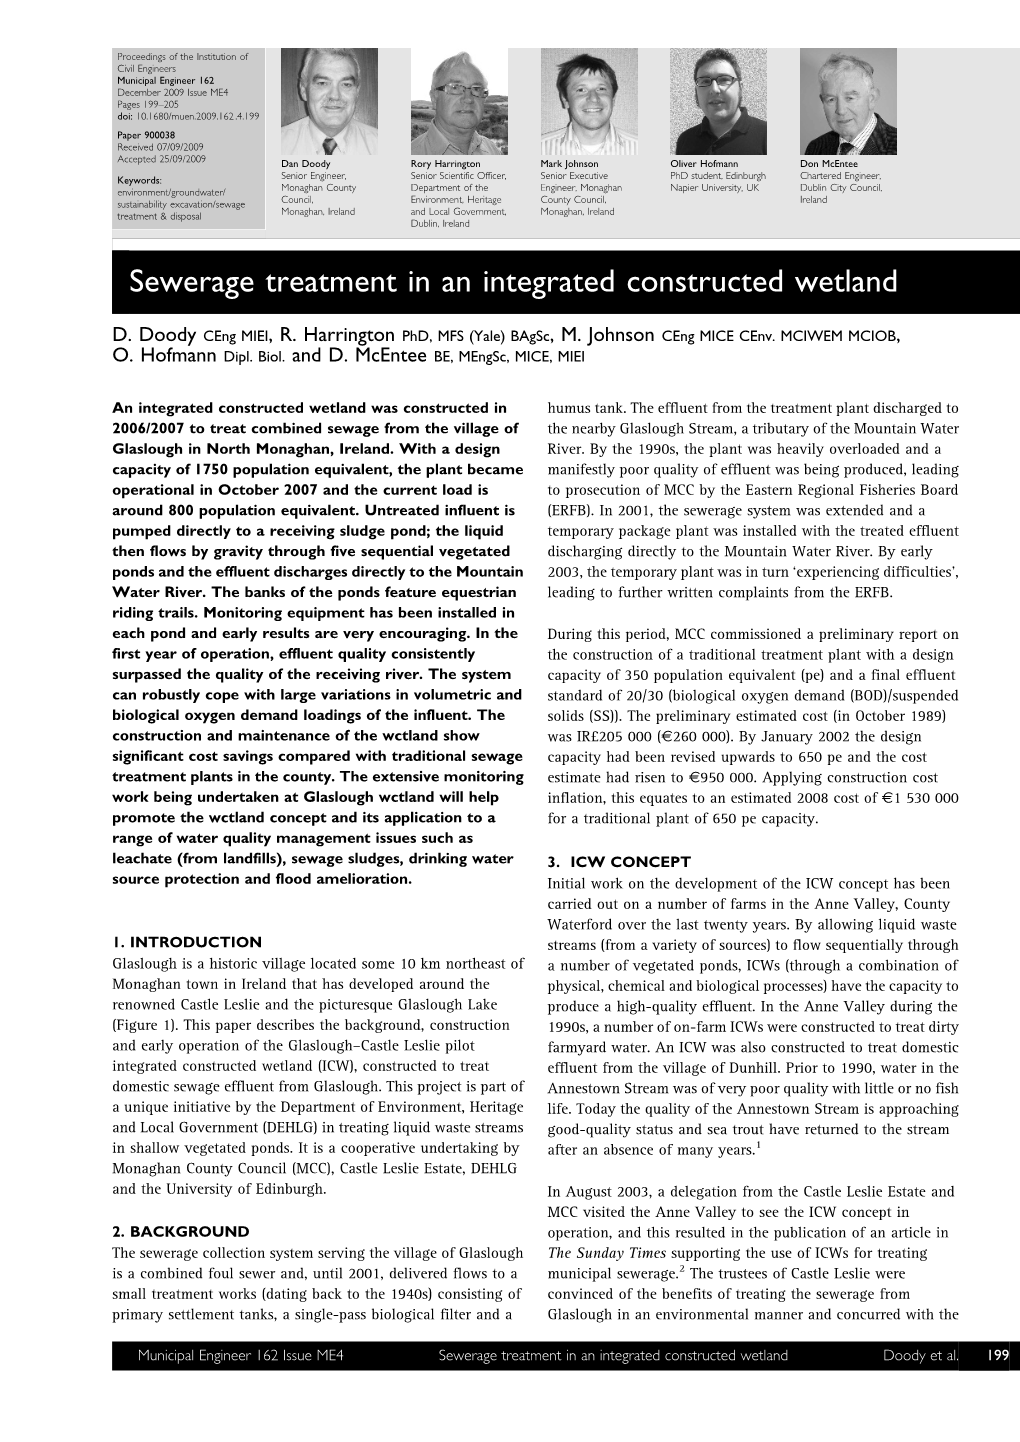 Sewerage Treatment in an Integrated Constructed Wetland